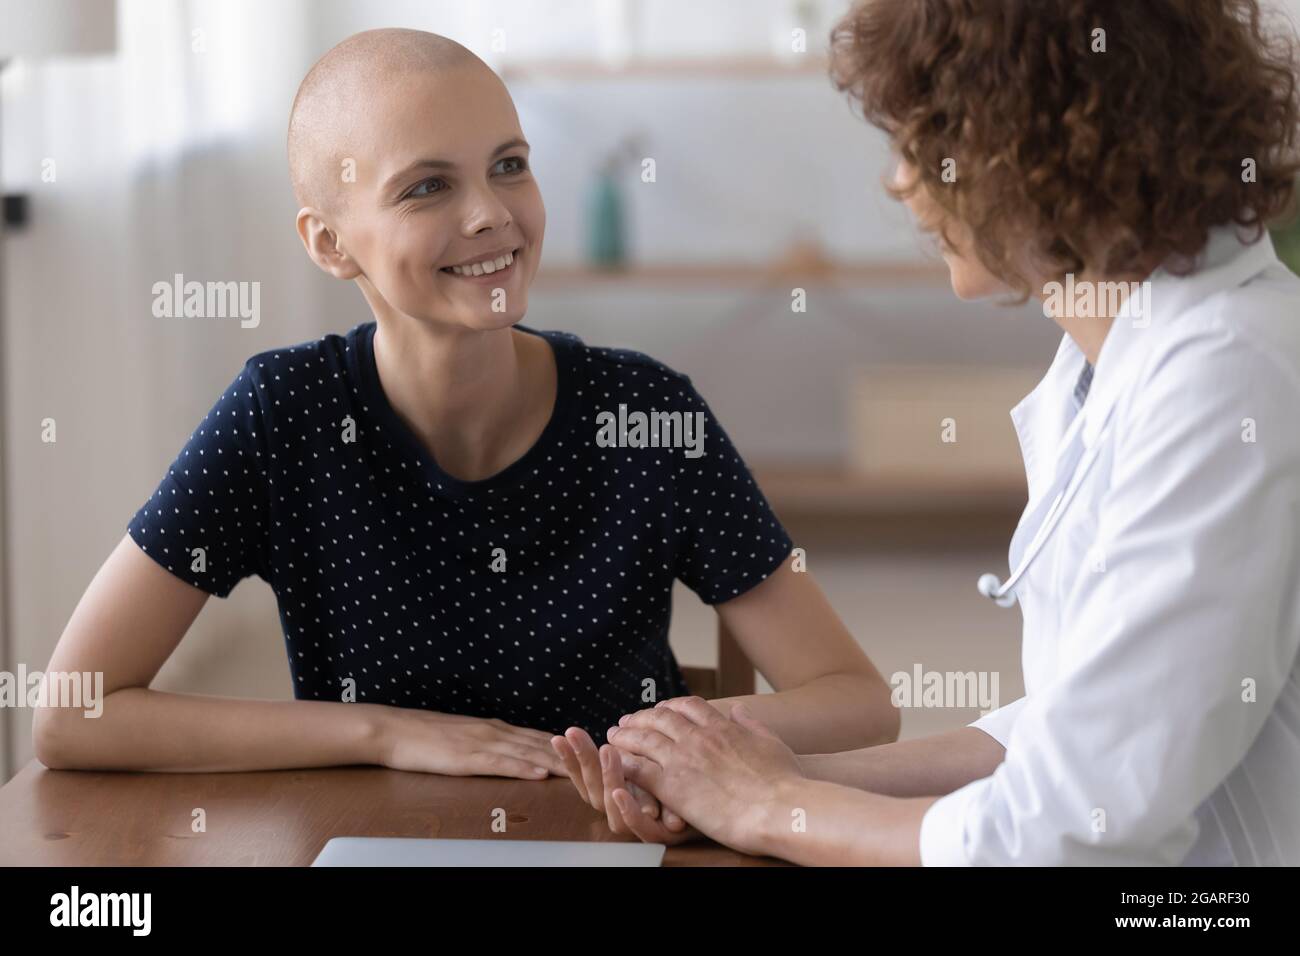 Smiling young cancer patient consulting with doctor. Stock Photo